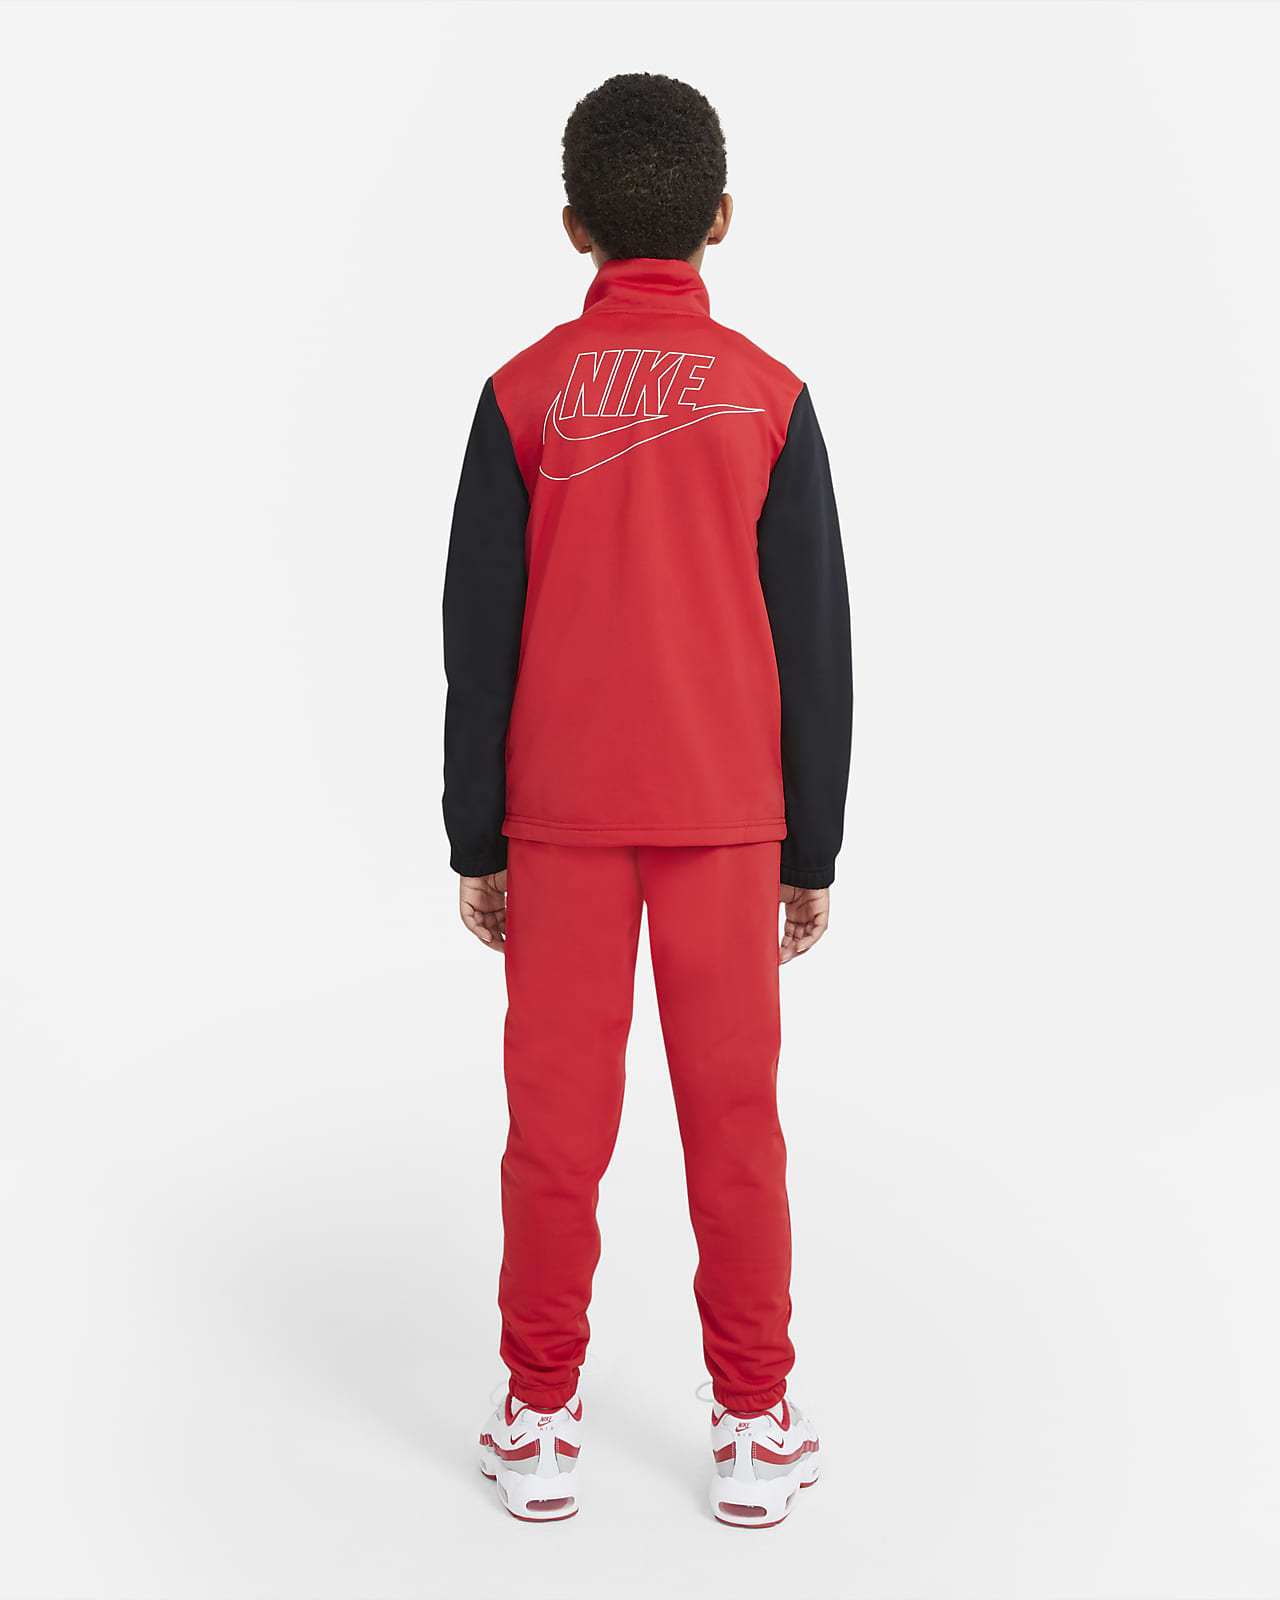 NWT NIKE SIZE XL RED GRAPHIC STANDARD FIT TRACKSUIT